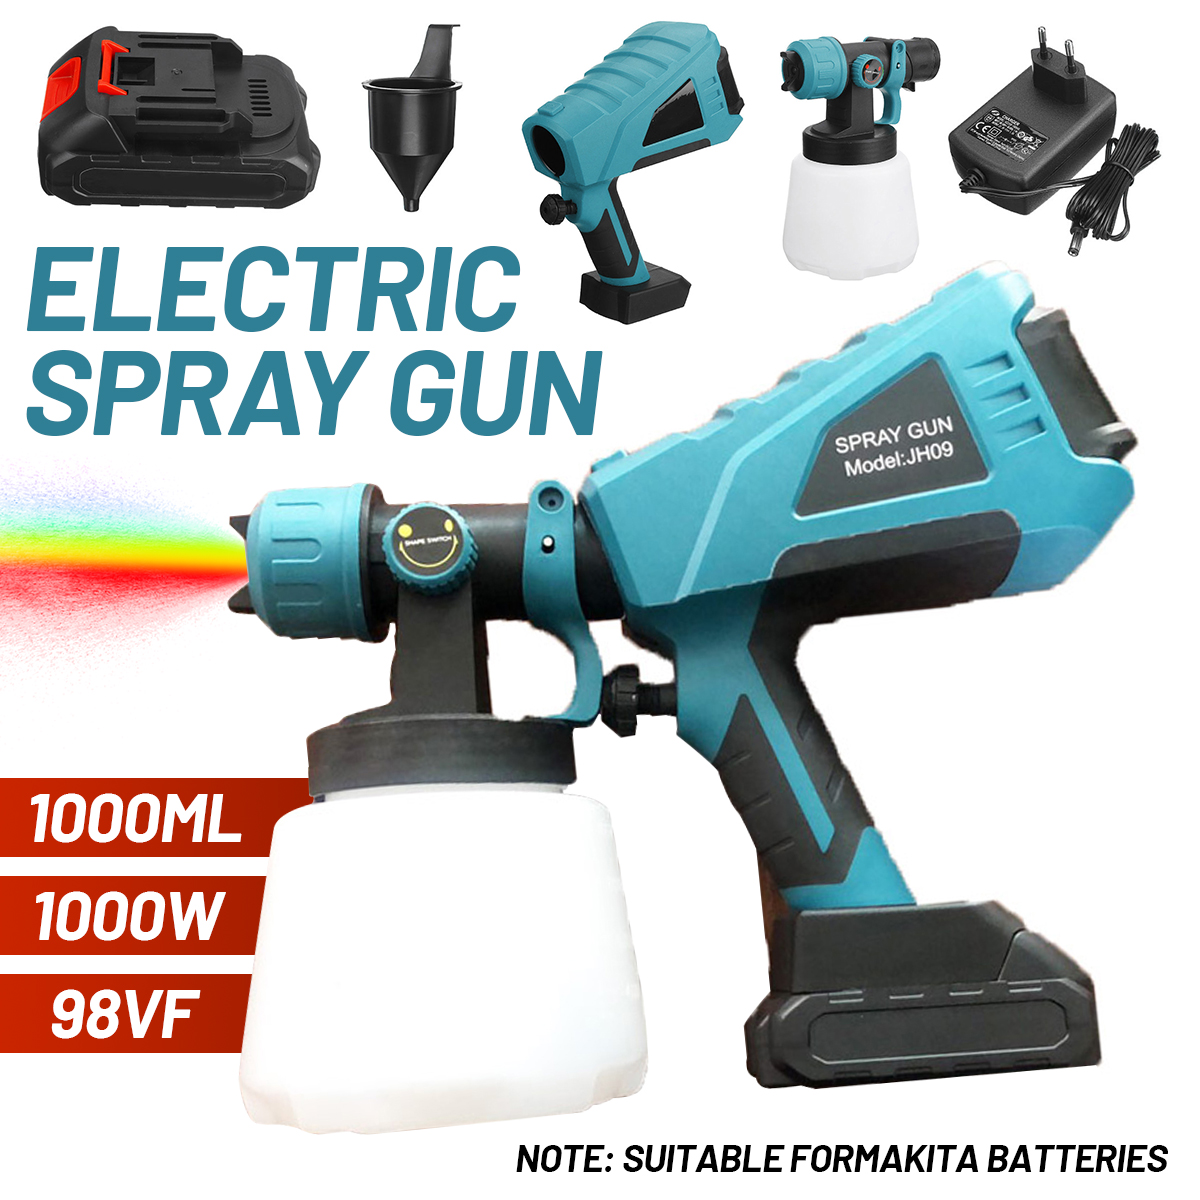 1000W-Paint-Tool-Paint-Sprayer-Guns-with-1000ml-Container-Spraying-Cleaning-Tool-Fit-Makita-1881632-2